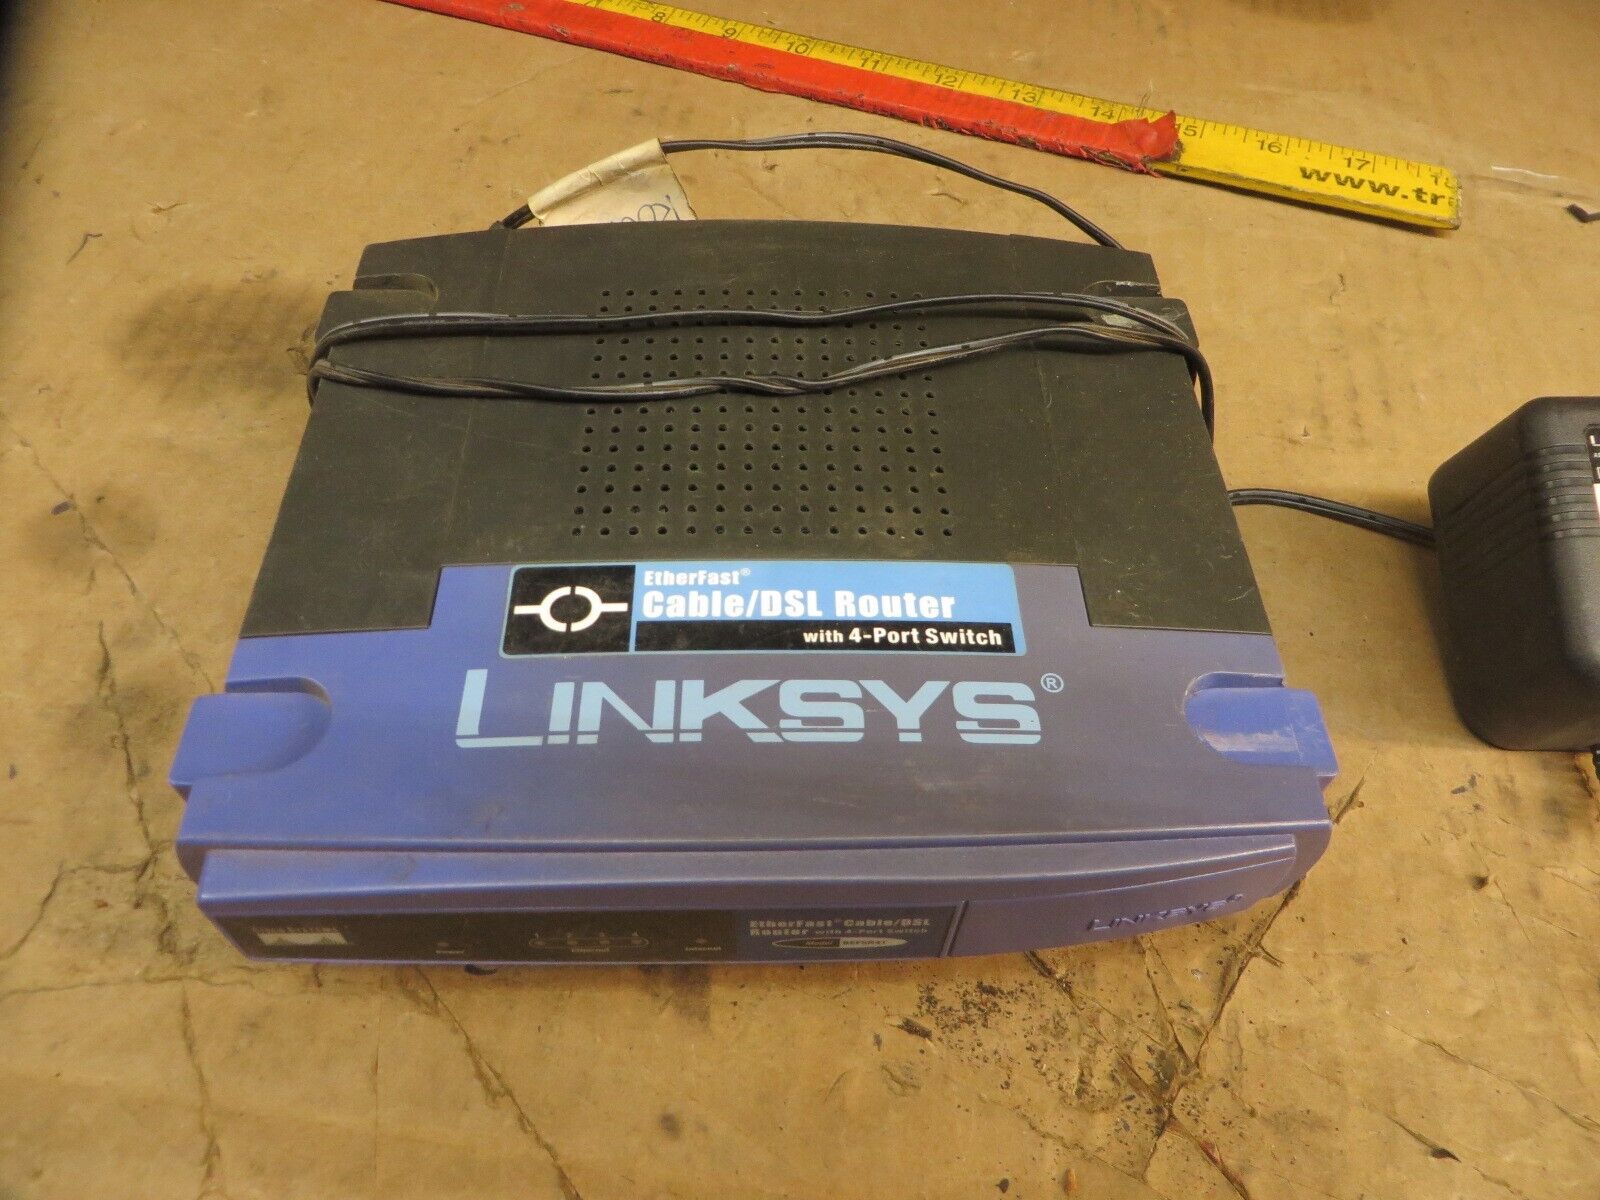 LINKSYS ETHERFAST CABLE DSL ROUTER W 4 PORT SWITCH + ADAPTER # BEFSR41